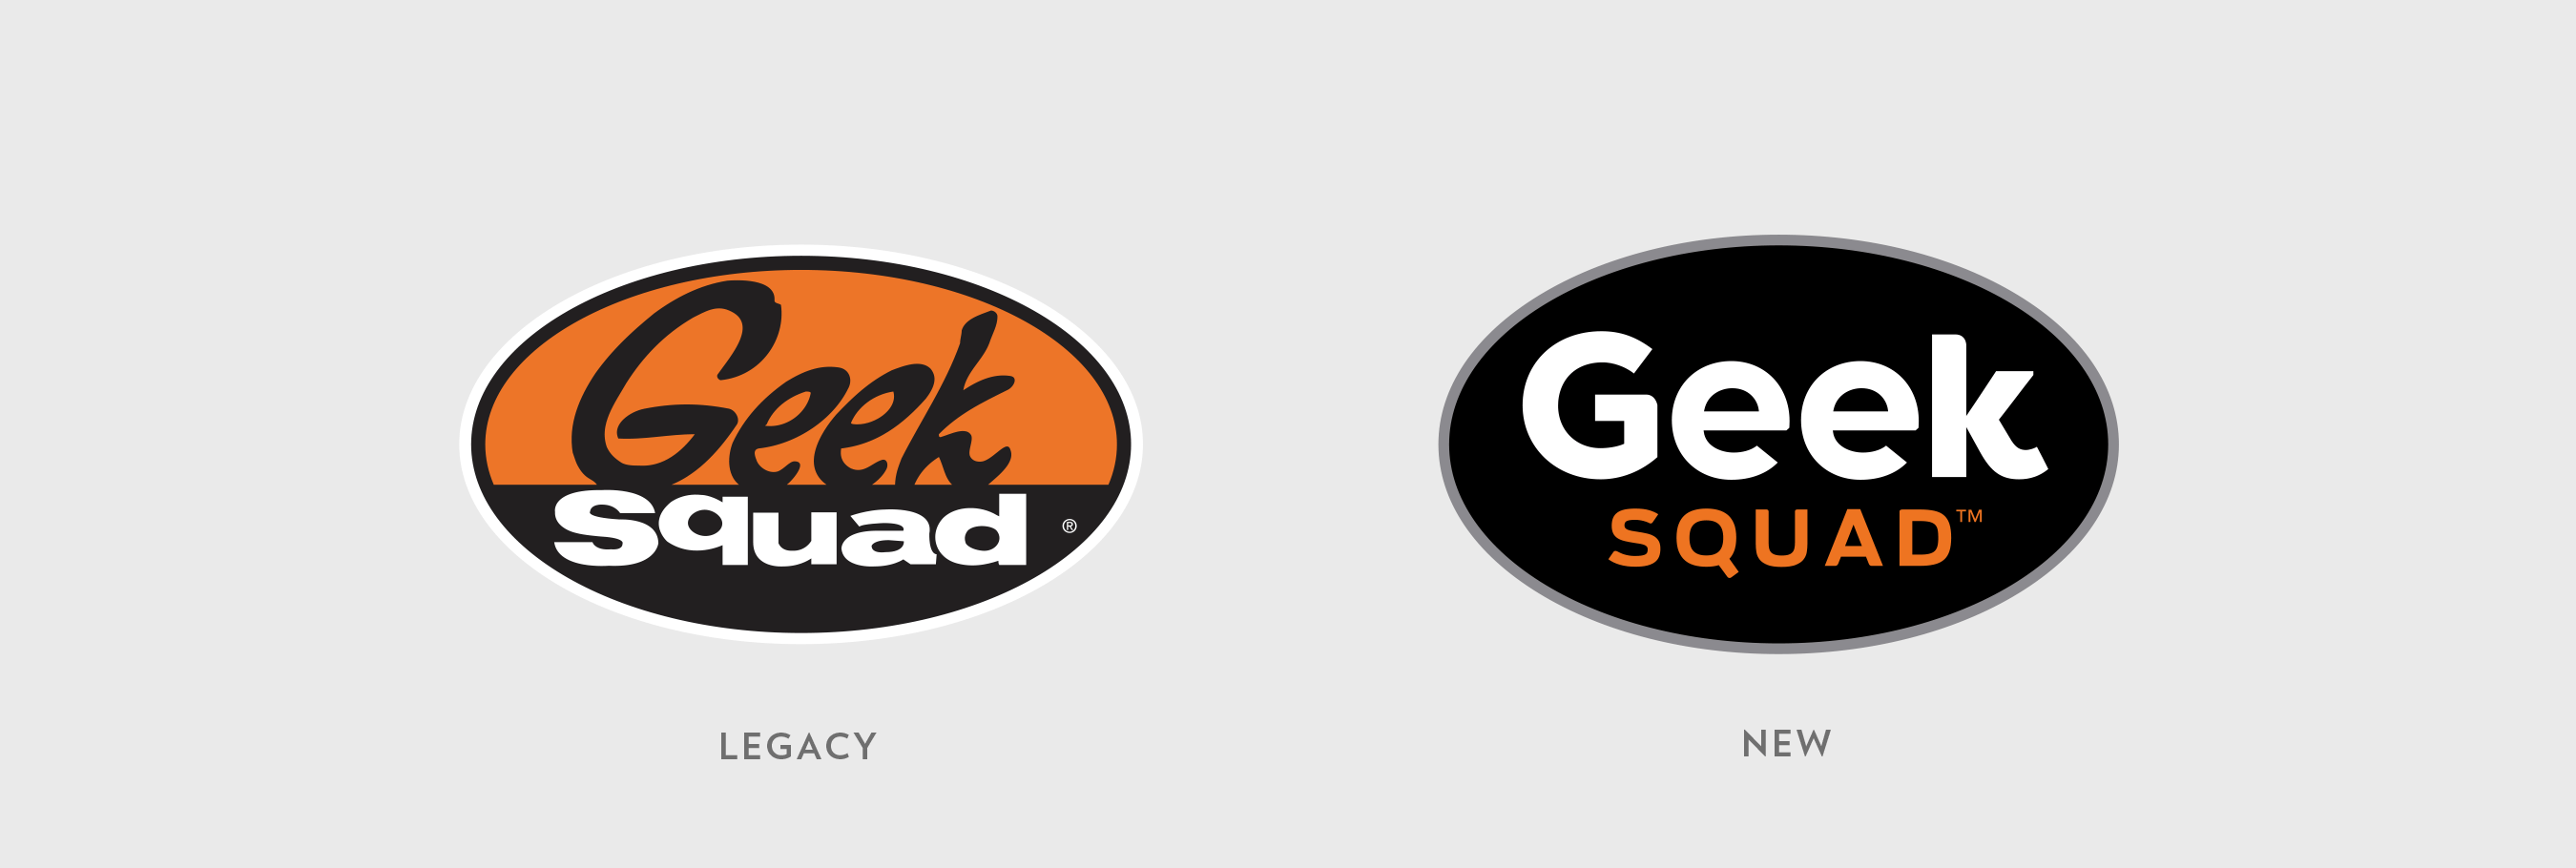 geek squad logo clipart 10 free Cliparts | Download images on ...